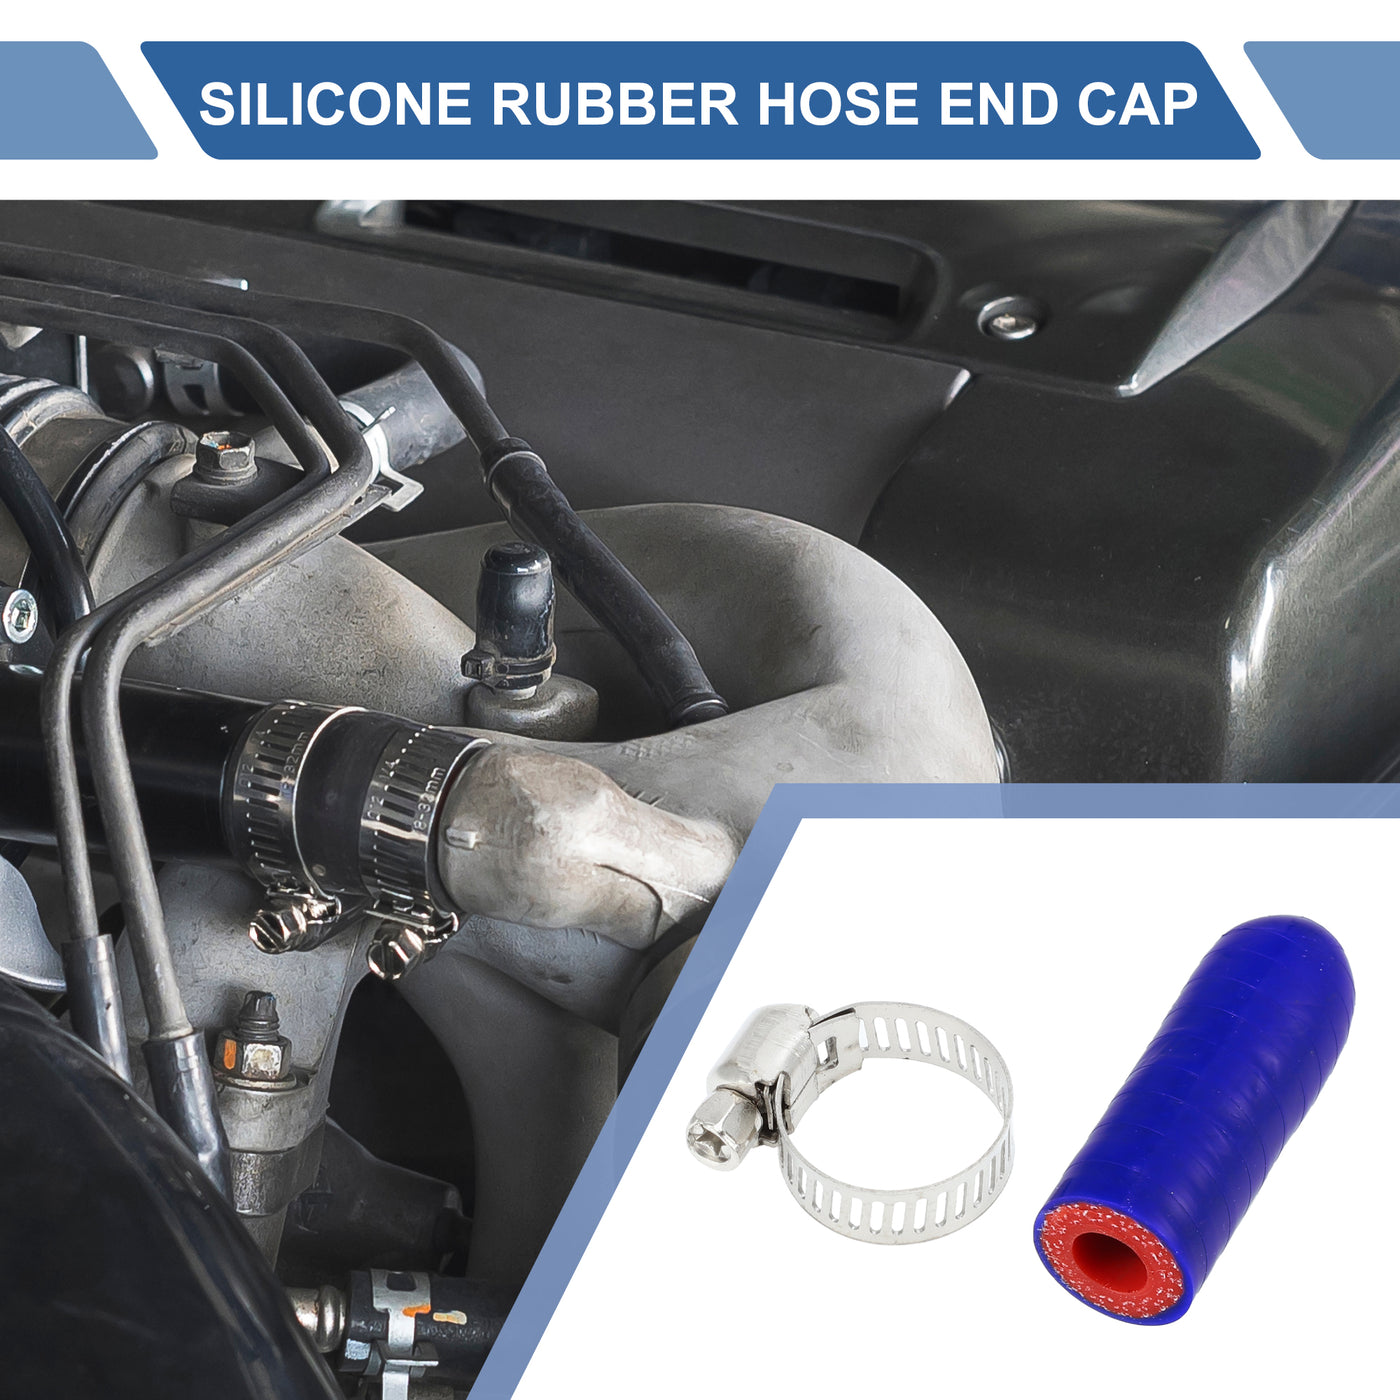 X AUTOHAUX 1 Pcs 30mm Length 8mm/0.31" ID Blue Red Car Silicone Rubber Hose End Cap with Clamps Silicone Reinforced Blanking Cap for Bypass Tube Universal